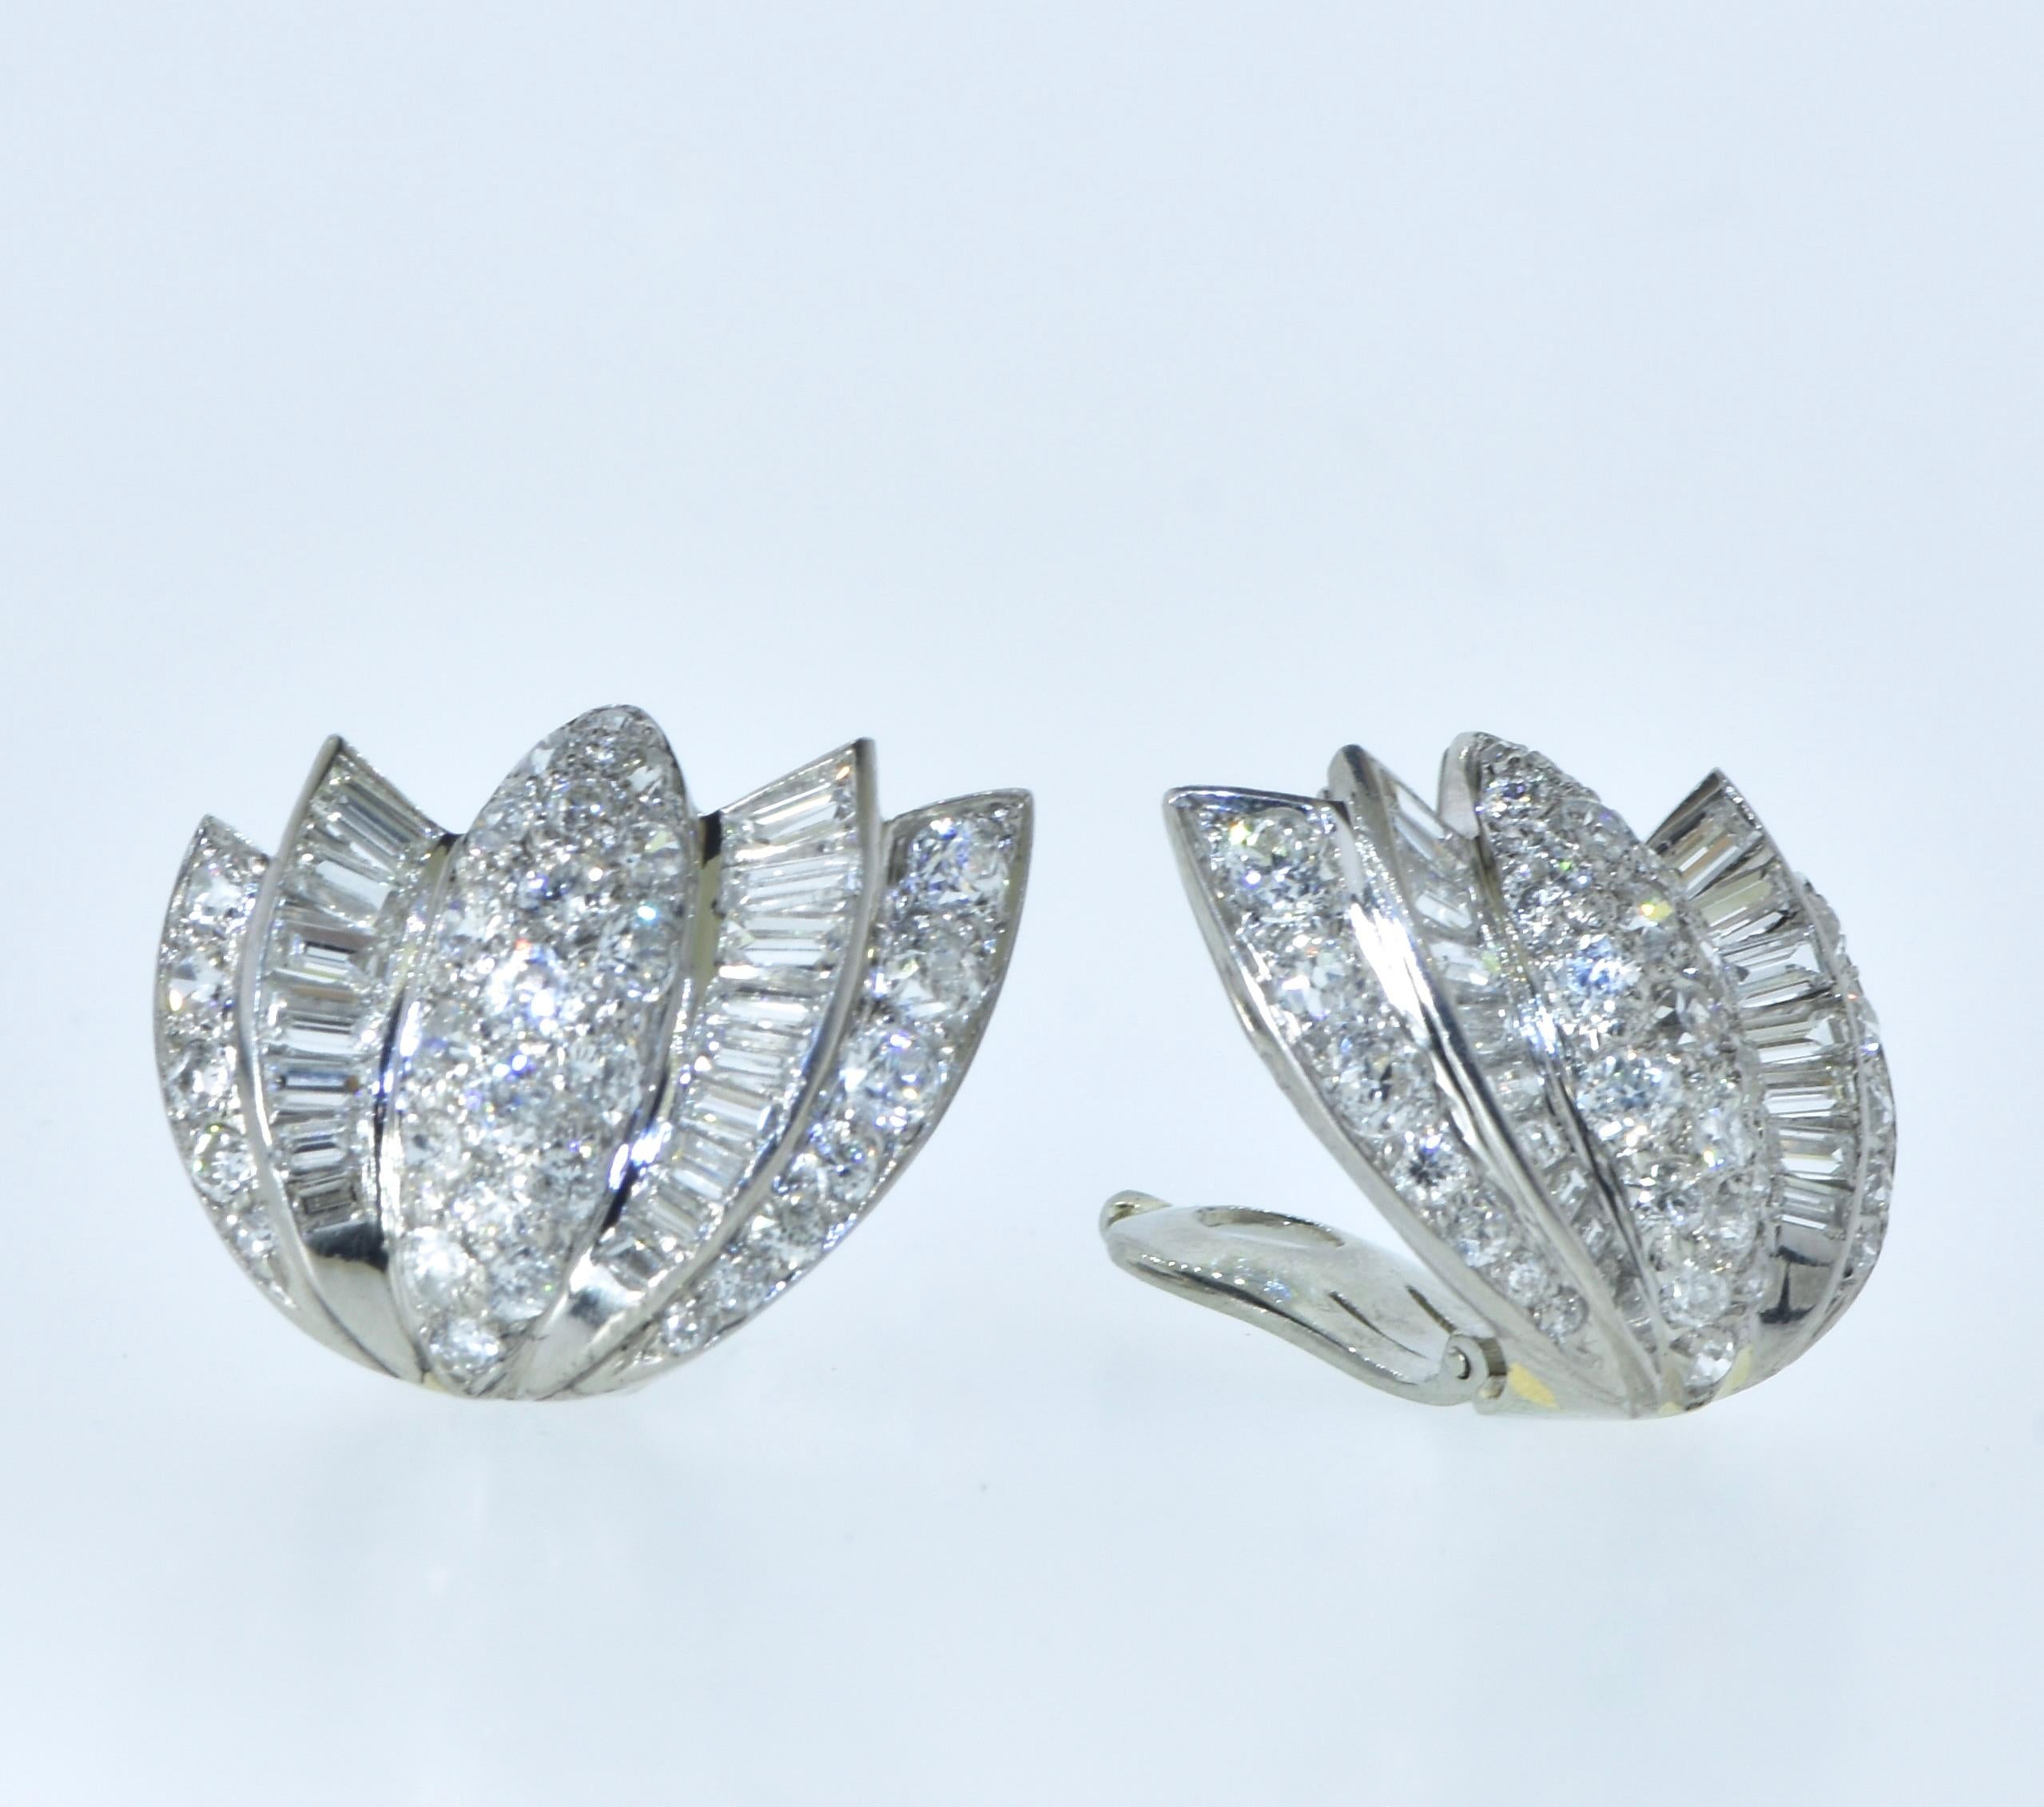 Art Deco Diamond and Platinum and 18K White Gold, French Earrings, circa 1930.  These earrings are comprised of both European cut Diamonds and tapered baguette diamonds.  The stones are all near colorless, H, and very slightly included, VS.  The